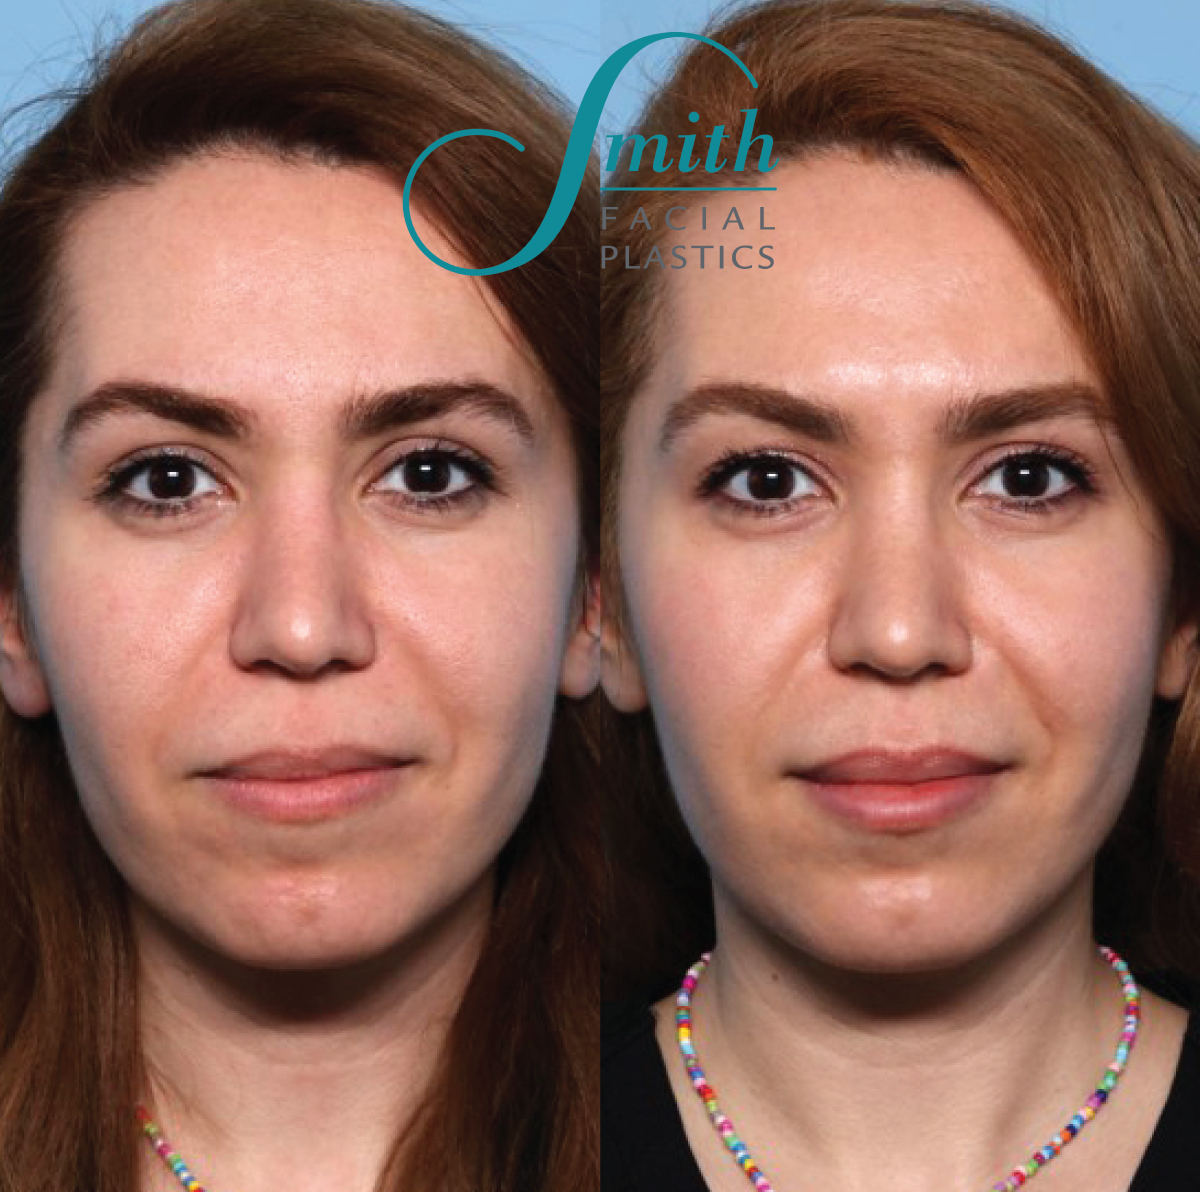 Dermal Filler Before and After Results in Columbus by Smith Facial Plastics